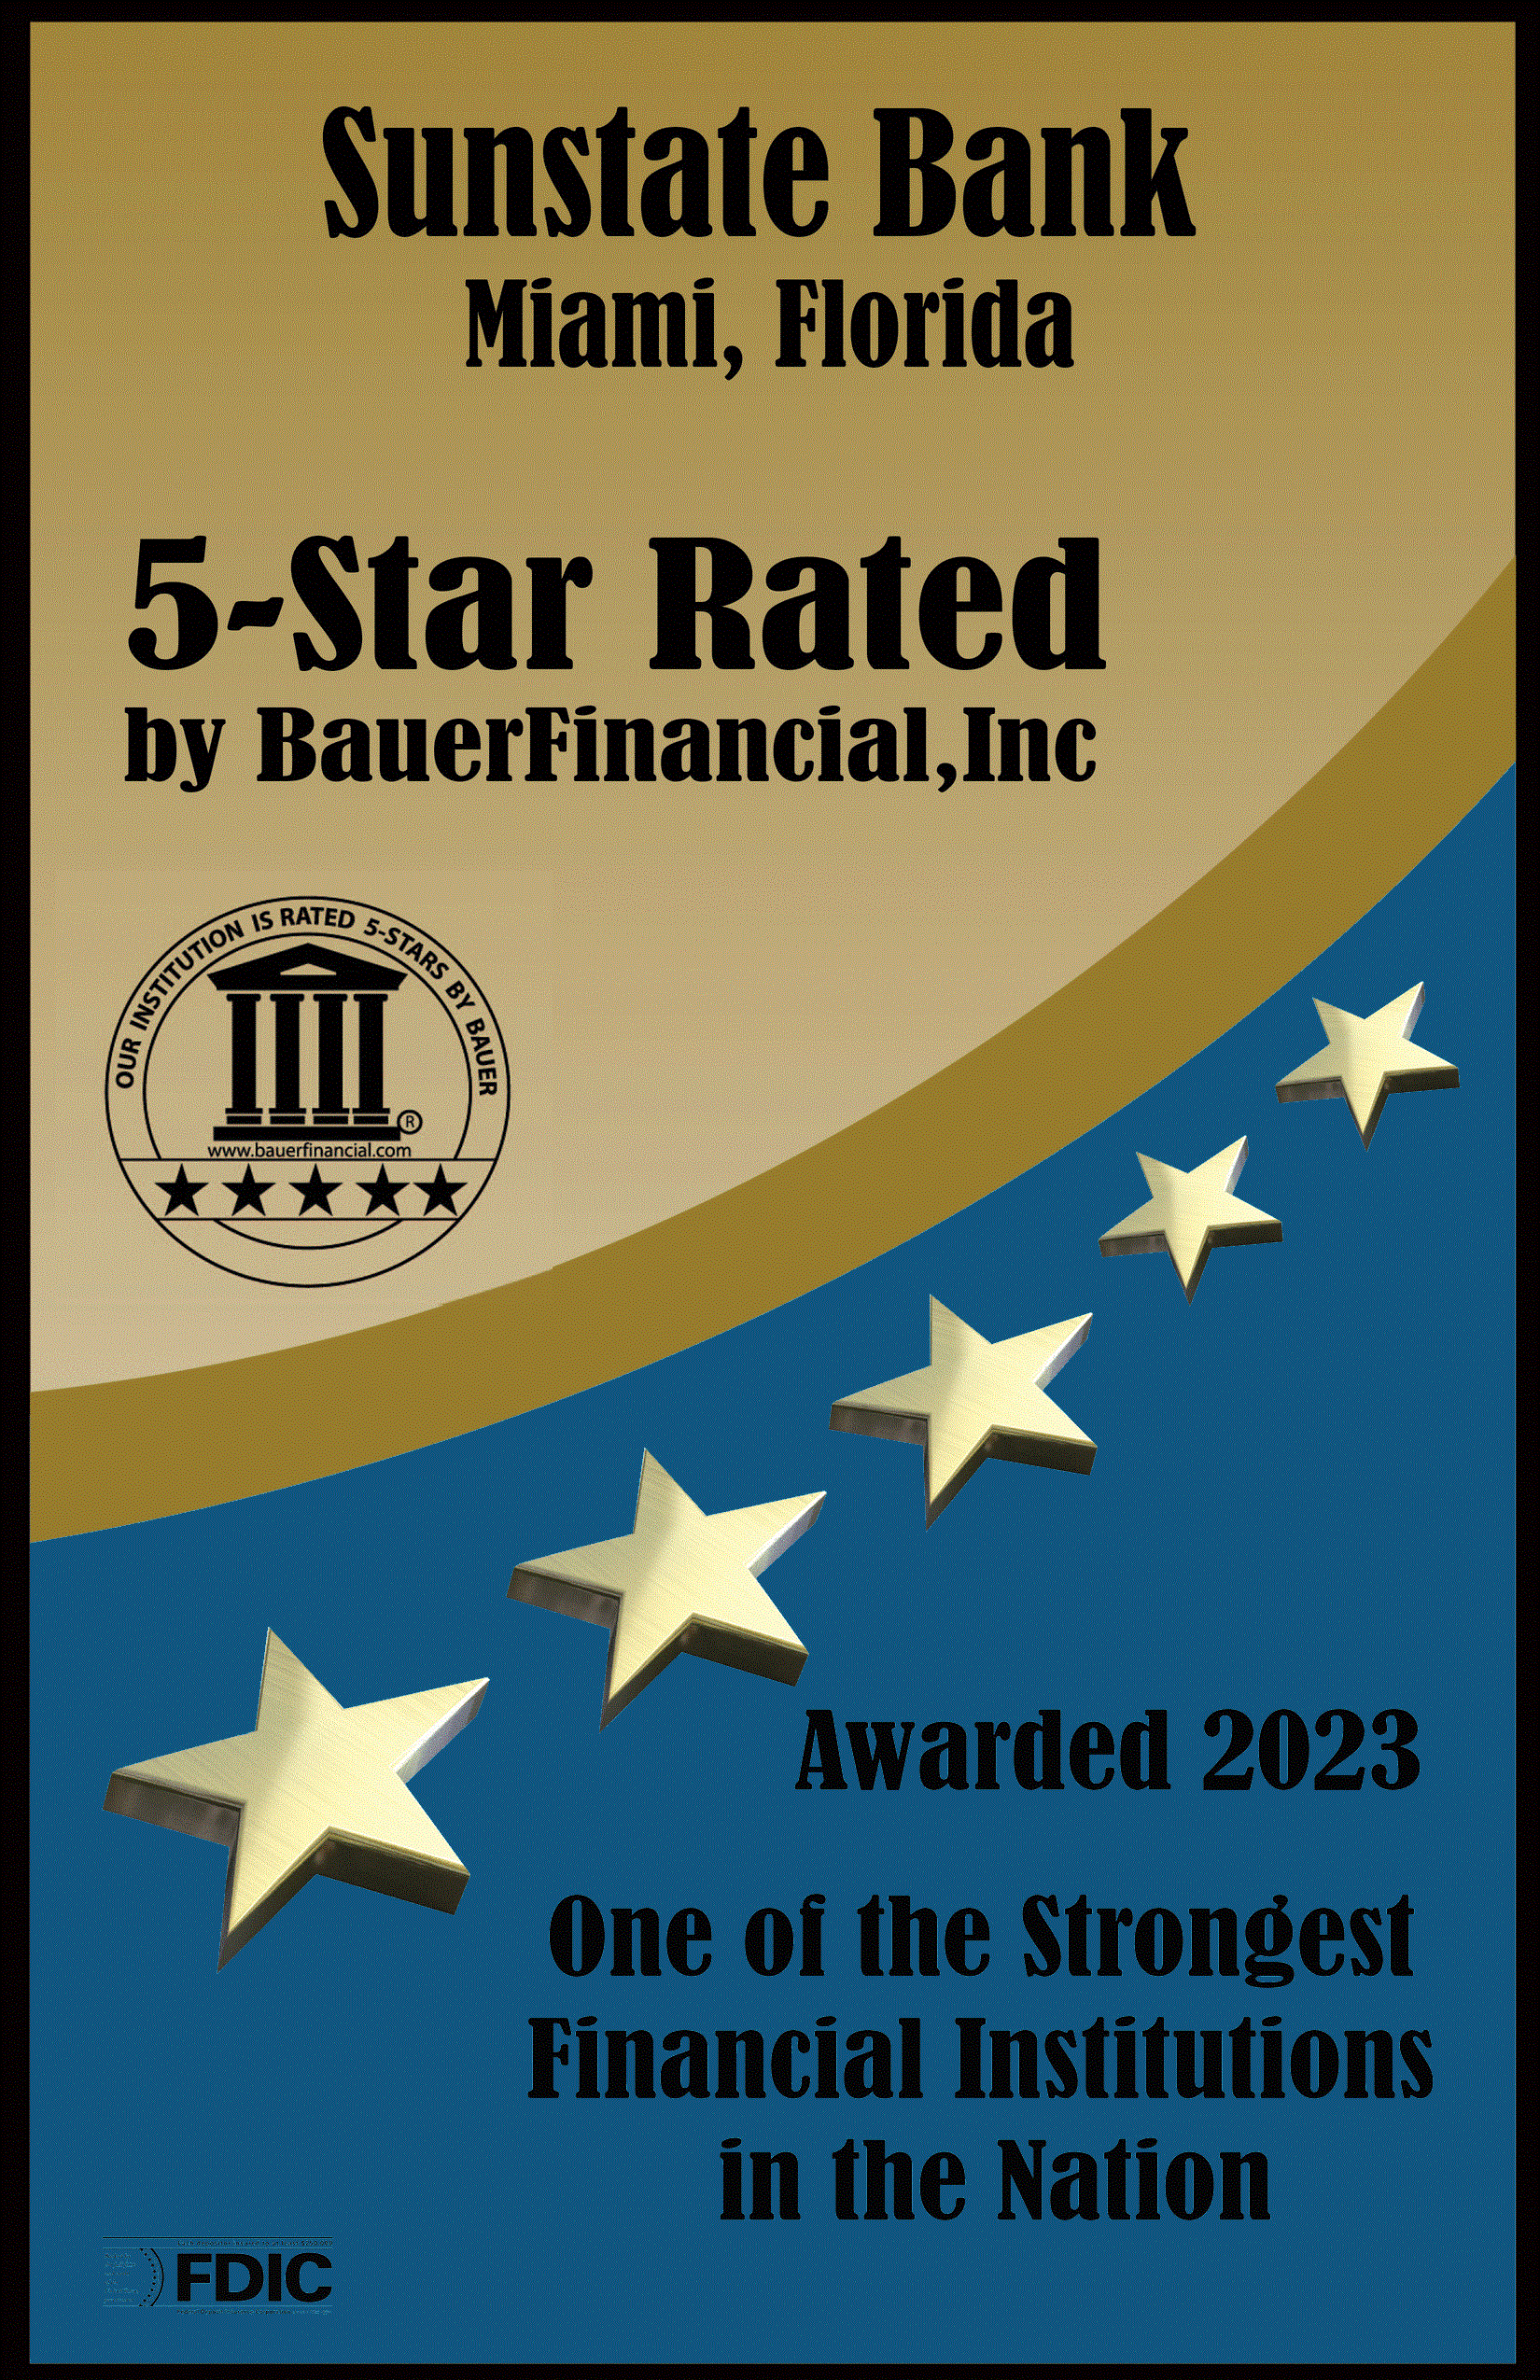 Sunstate Bank is Bauer Financial 5 Star Rated